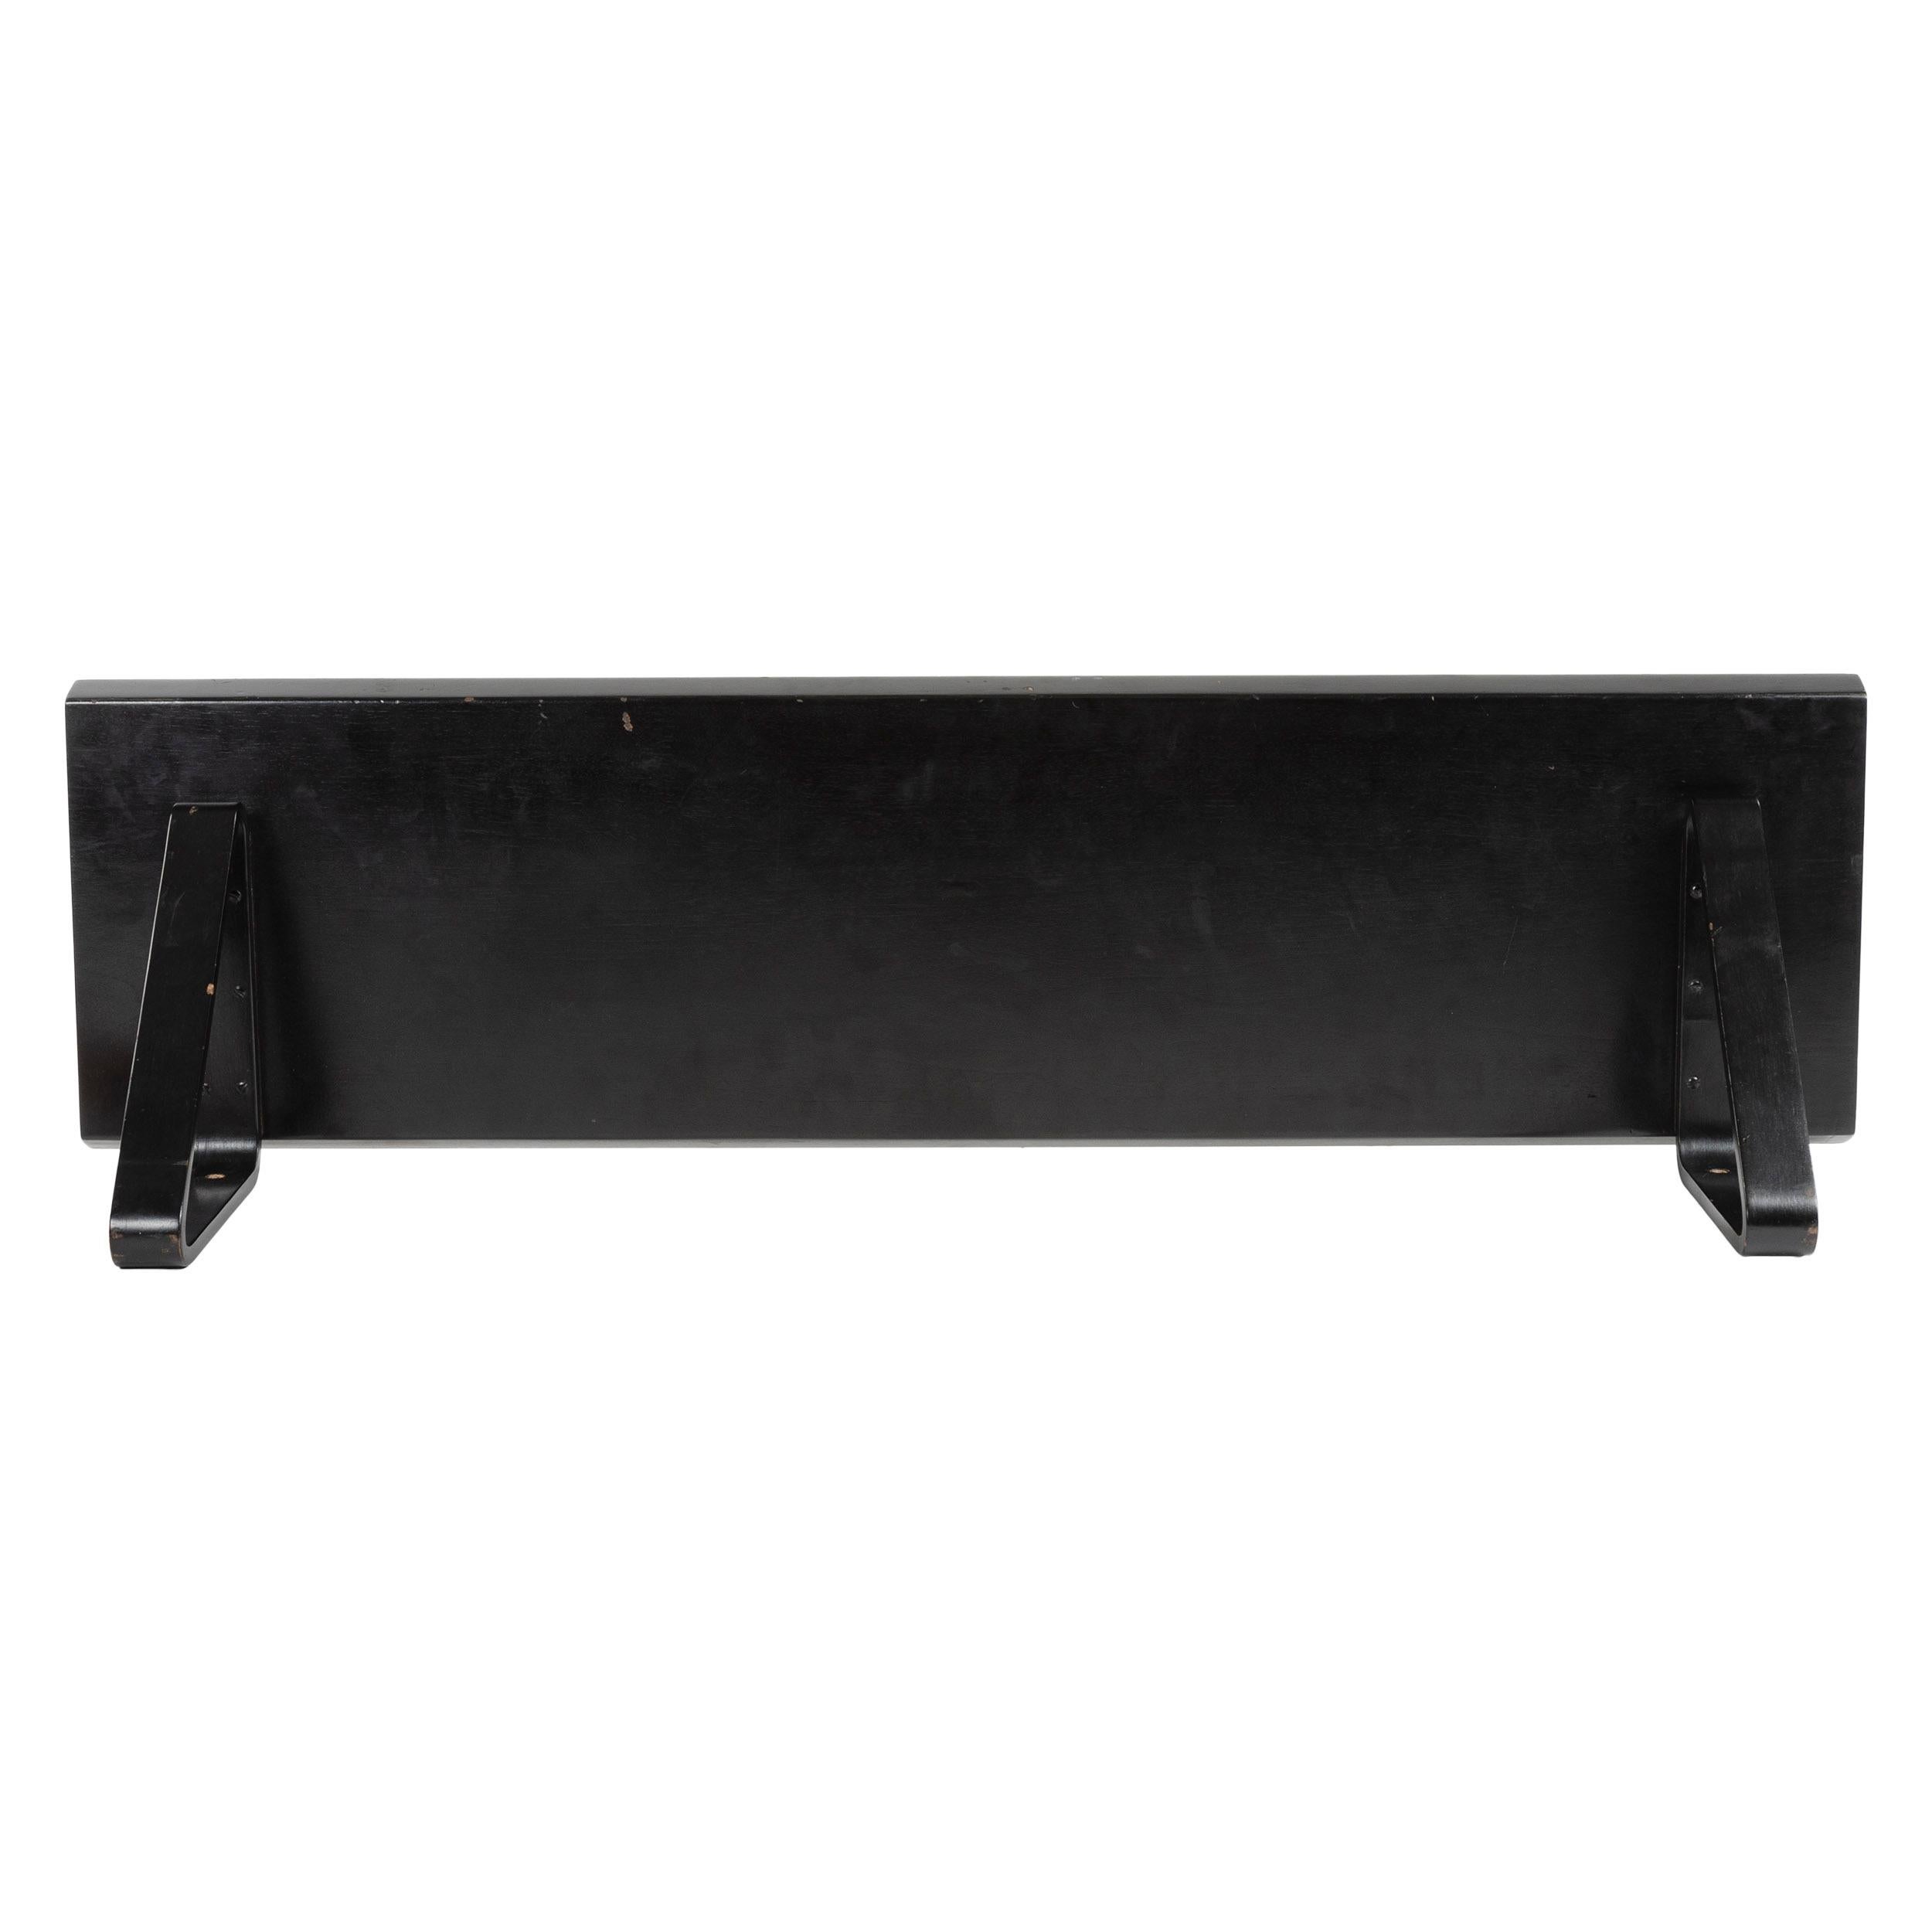 Wall Mounted Shelf by Edward Wormley for Dunbar In Good Condition For Sale In Sagaponack, NY